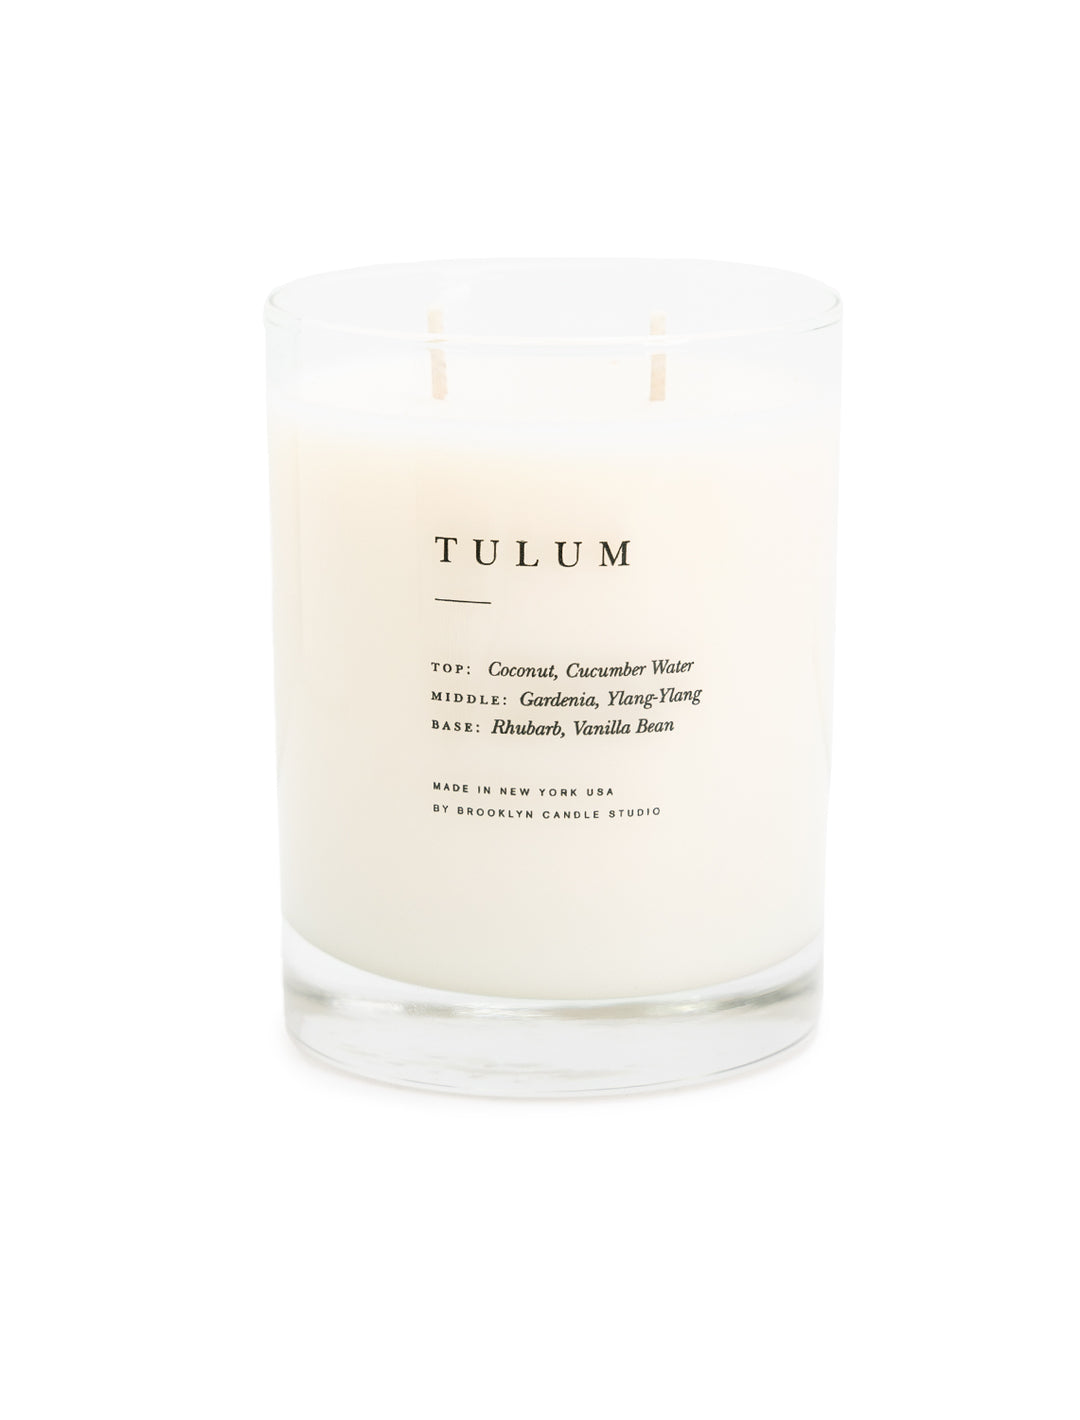 Front view of Brooklyn Candle Studio's ESCAPIST tulum candle.